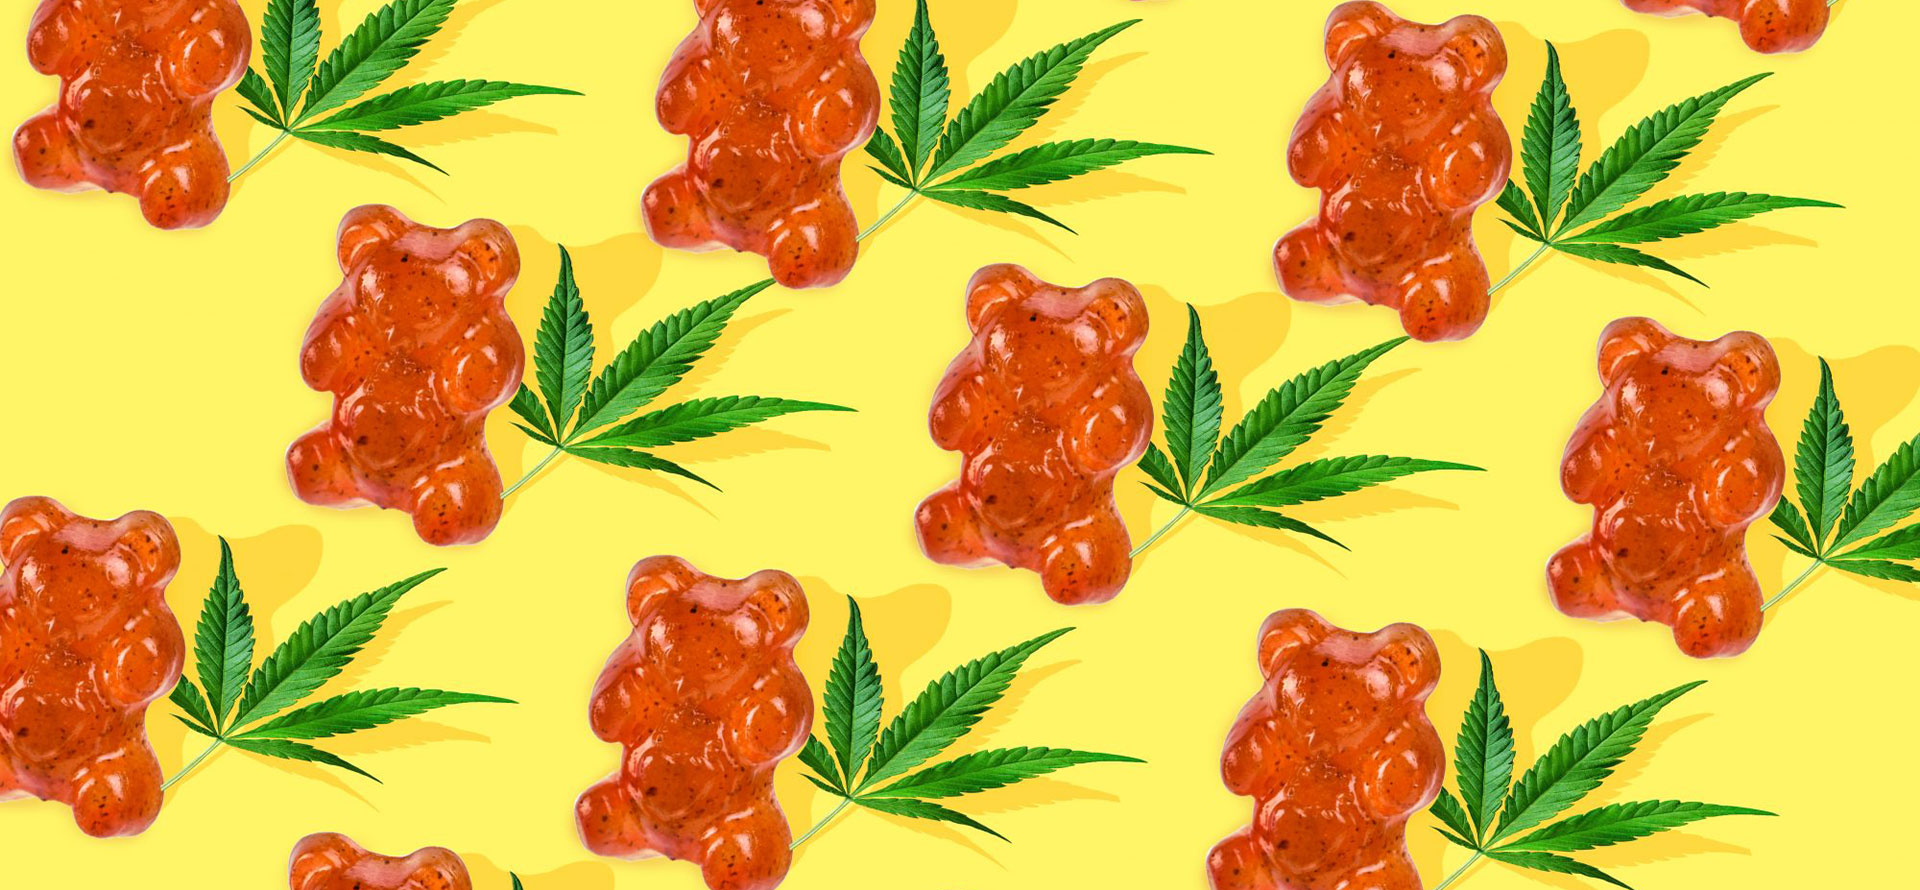 CBD edibles in your system gummy bears.